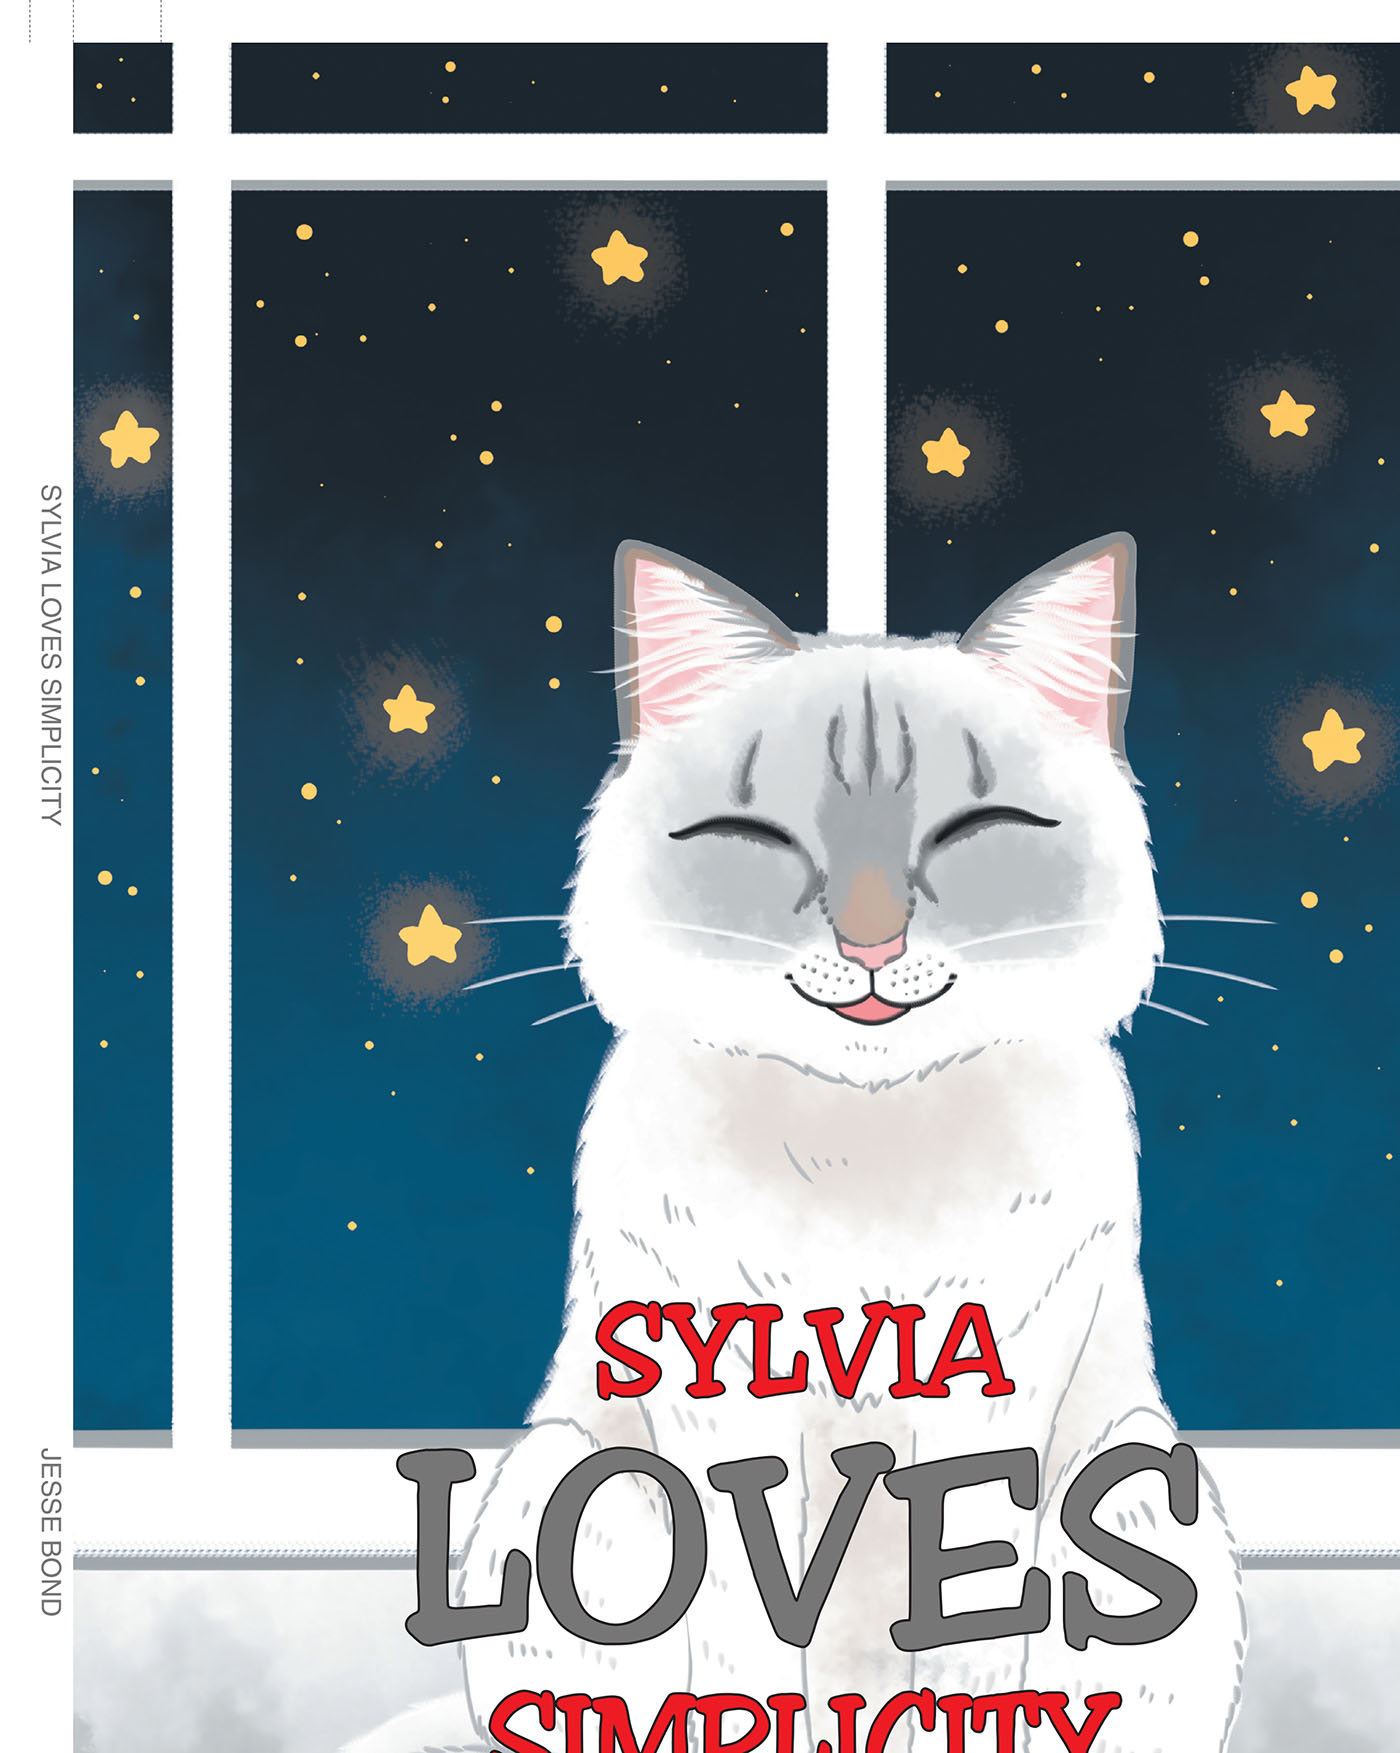 Author Jesse Bond’s New Book, "Sylvia Loves Simplicity," is a Faith-Based Tale About Appreciating Simplicity and Acknowledging All That God Grants Throughout the Day